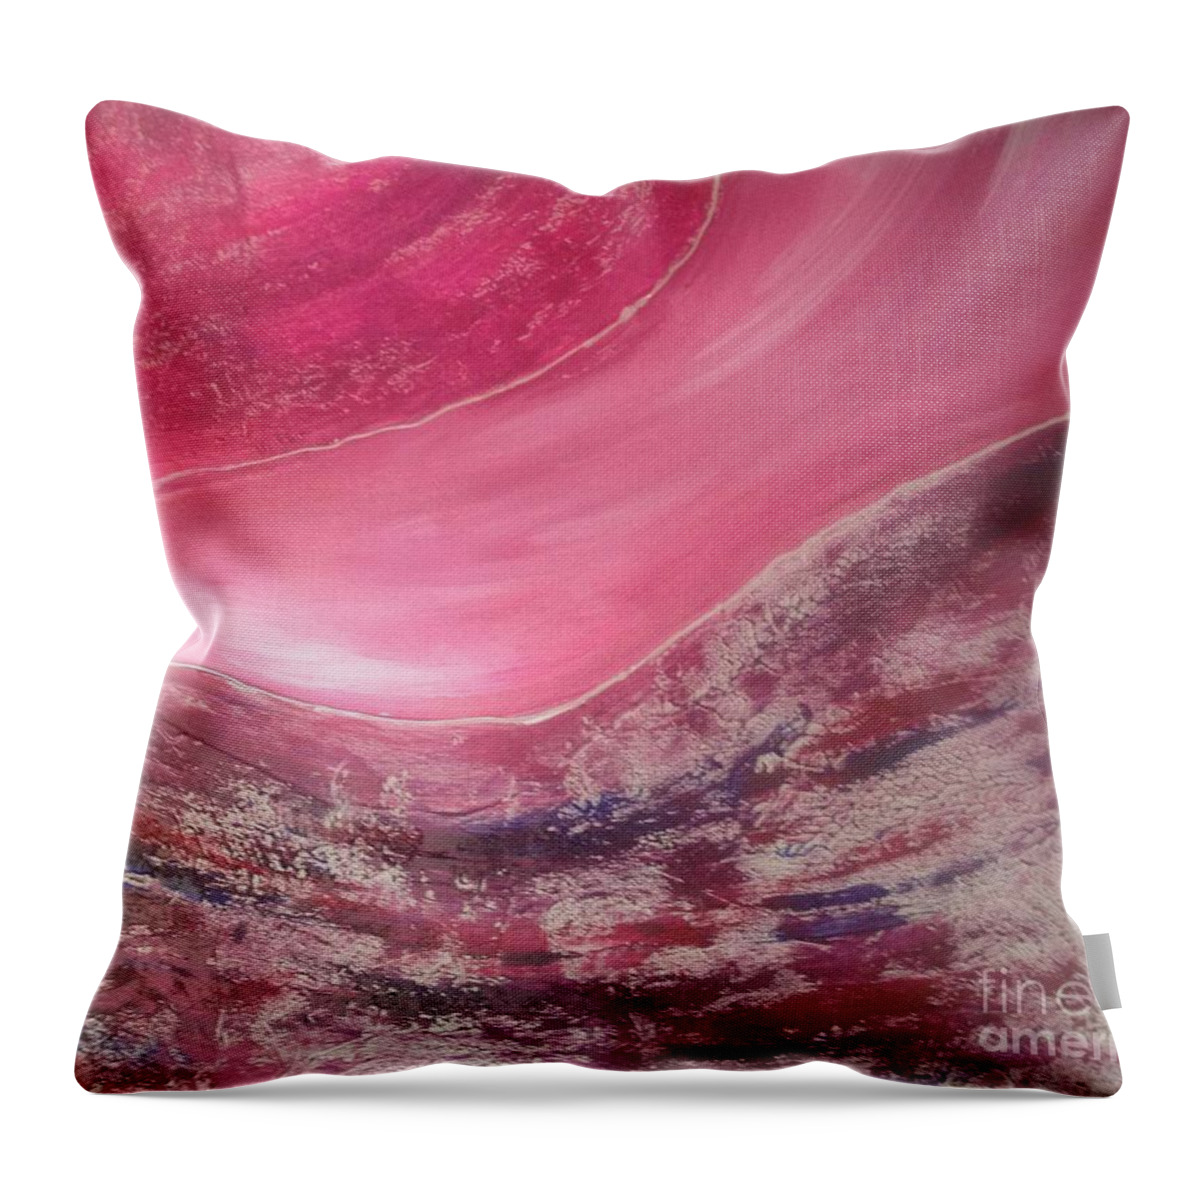 The Milky Way Throw Pillow featuring the painting The Milky Way by Sarahleah Hankes